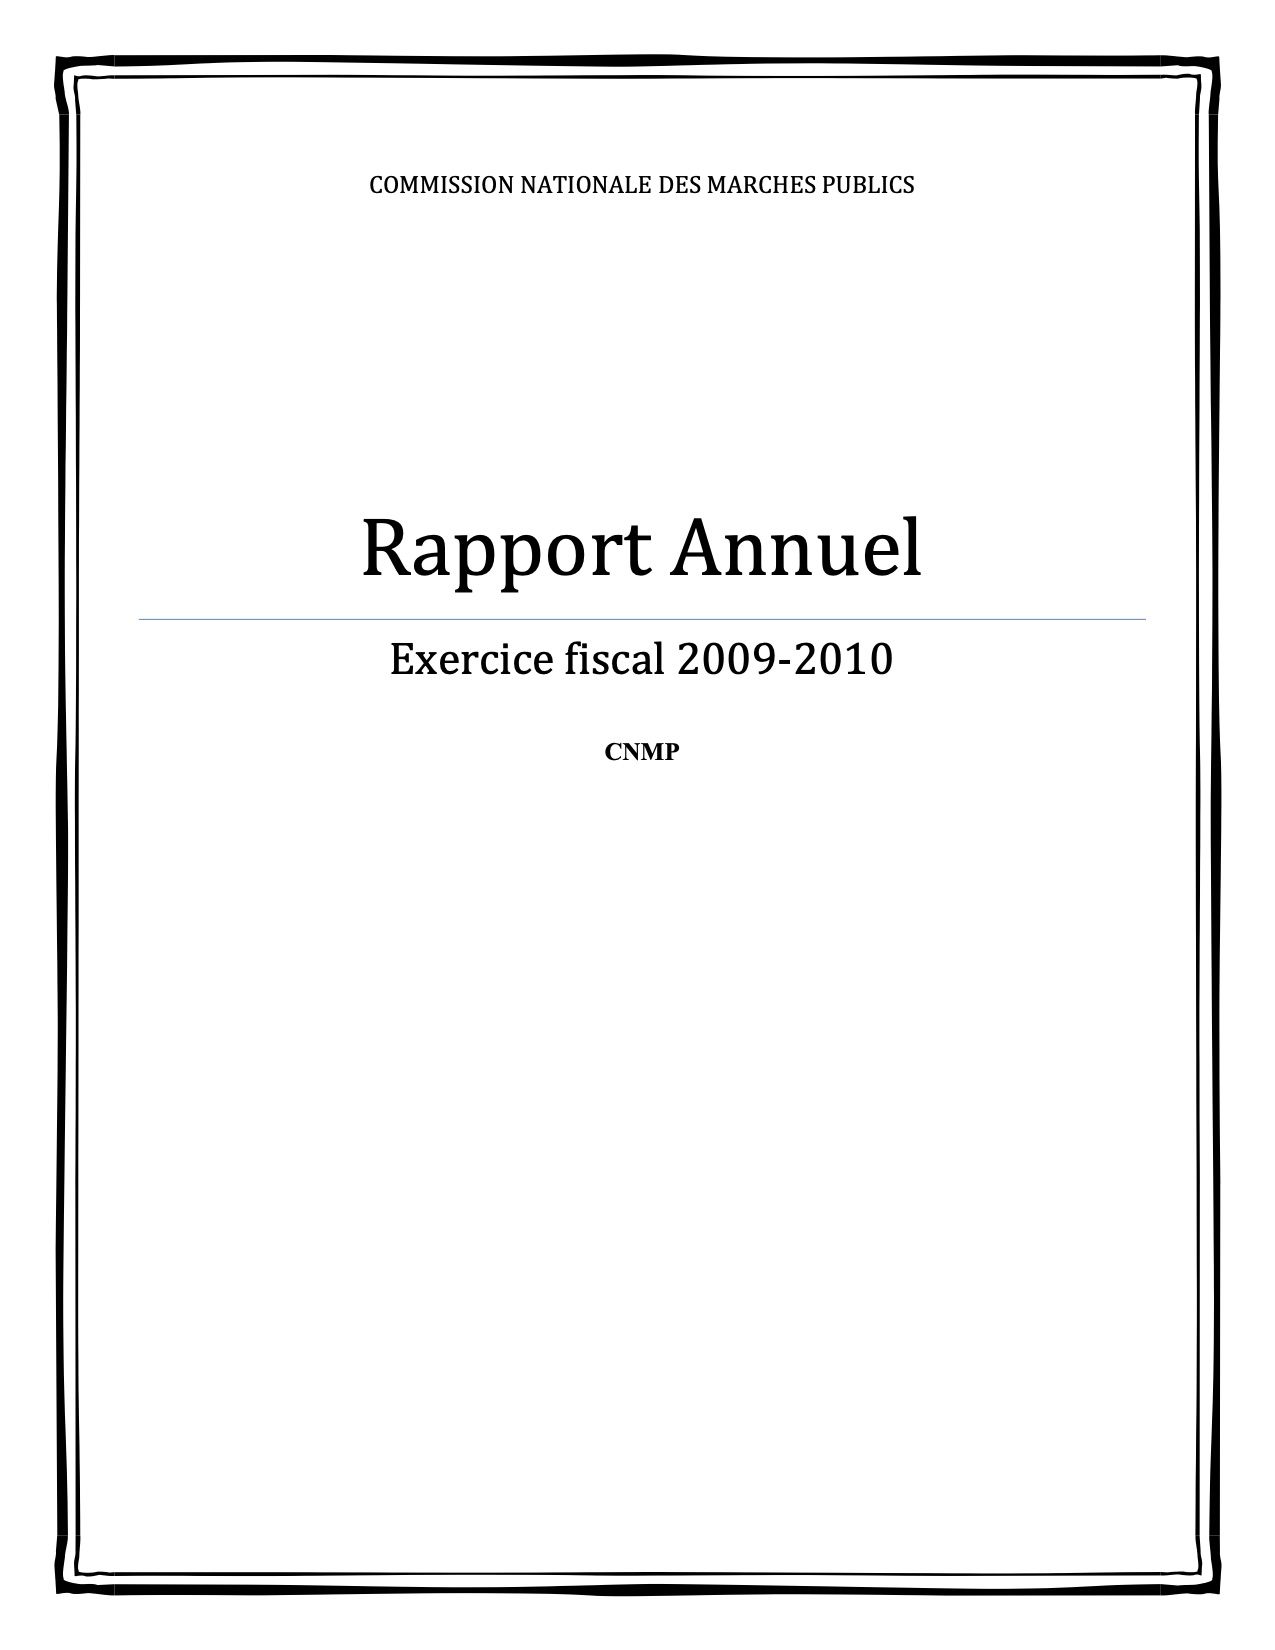 Rapport annuel 2009-2010